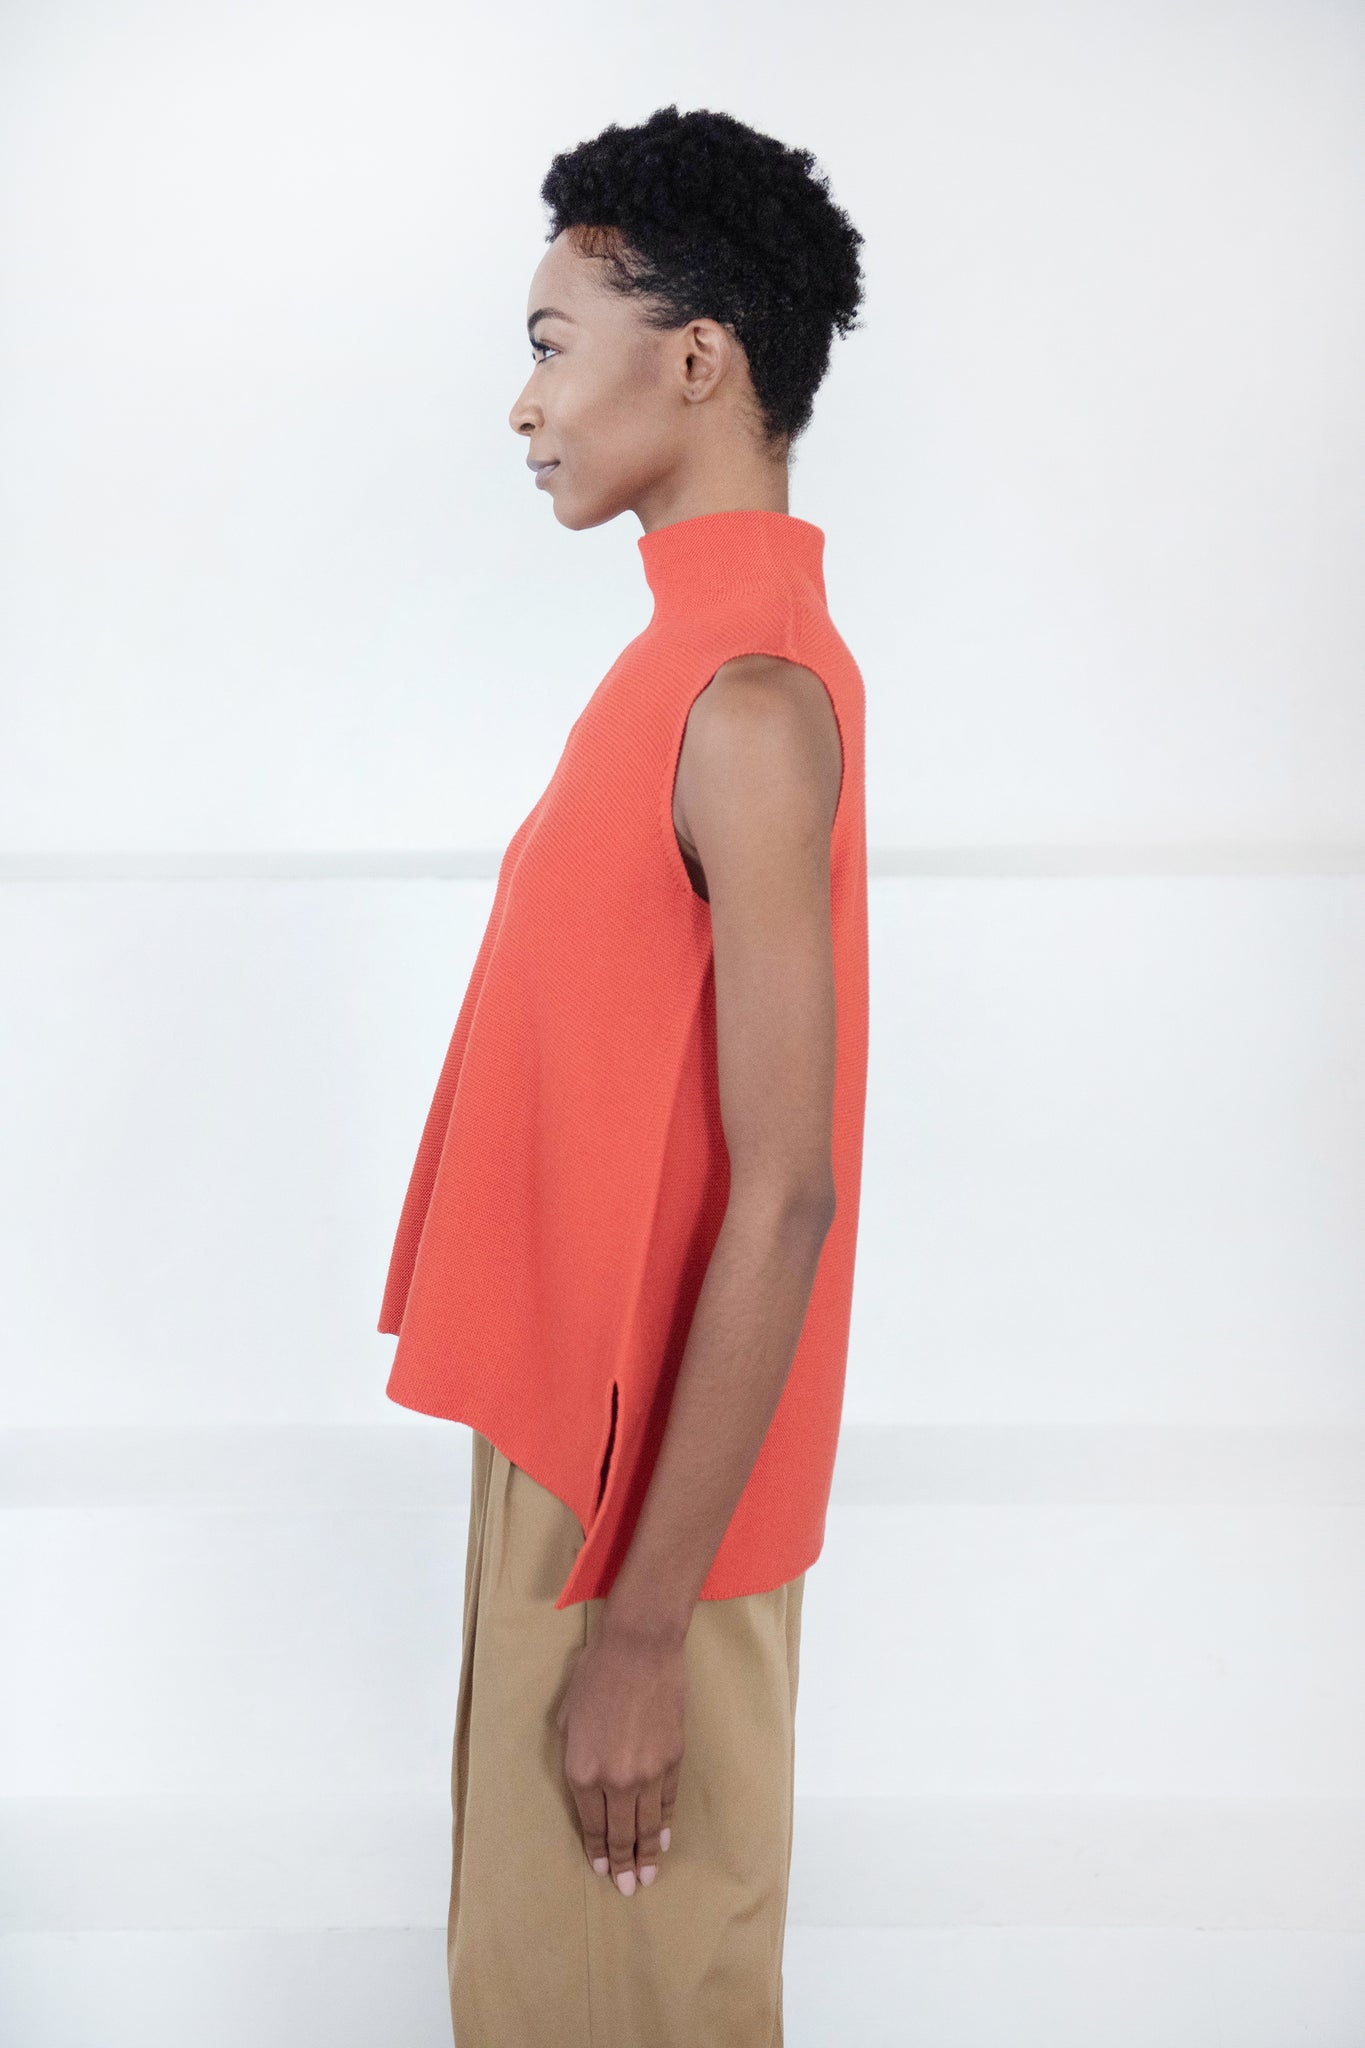 Christian Wijnants - Kewit Whole Garment Top, Red Coral